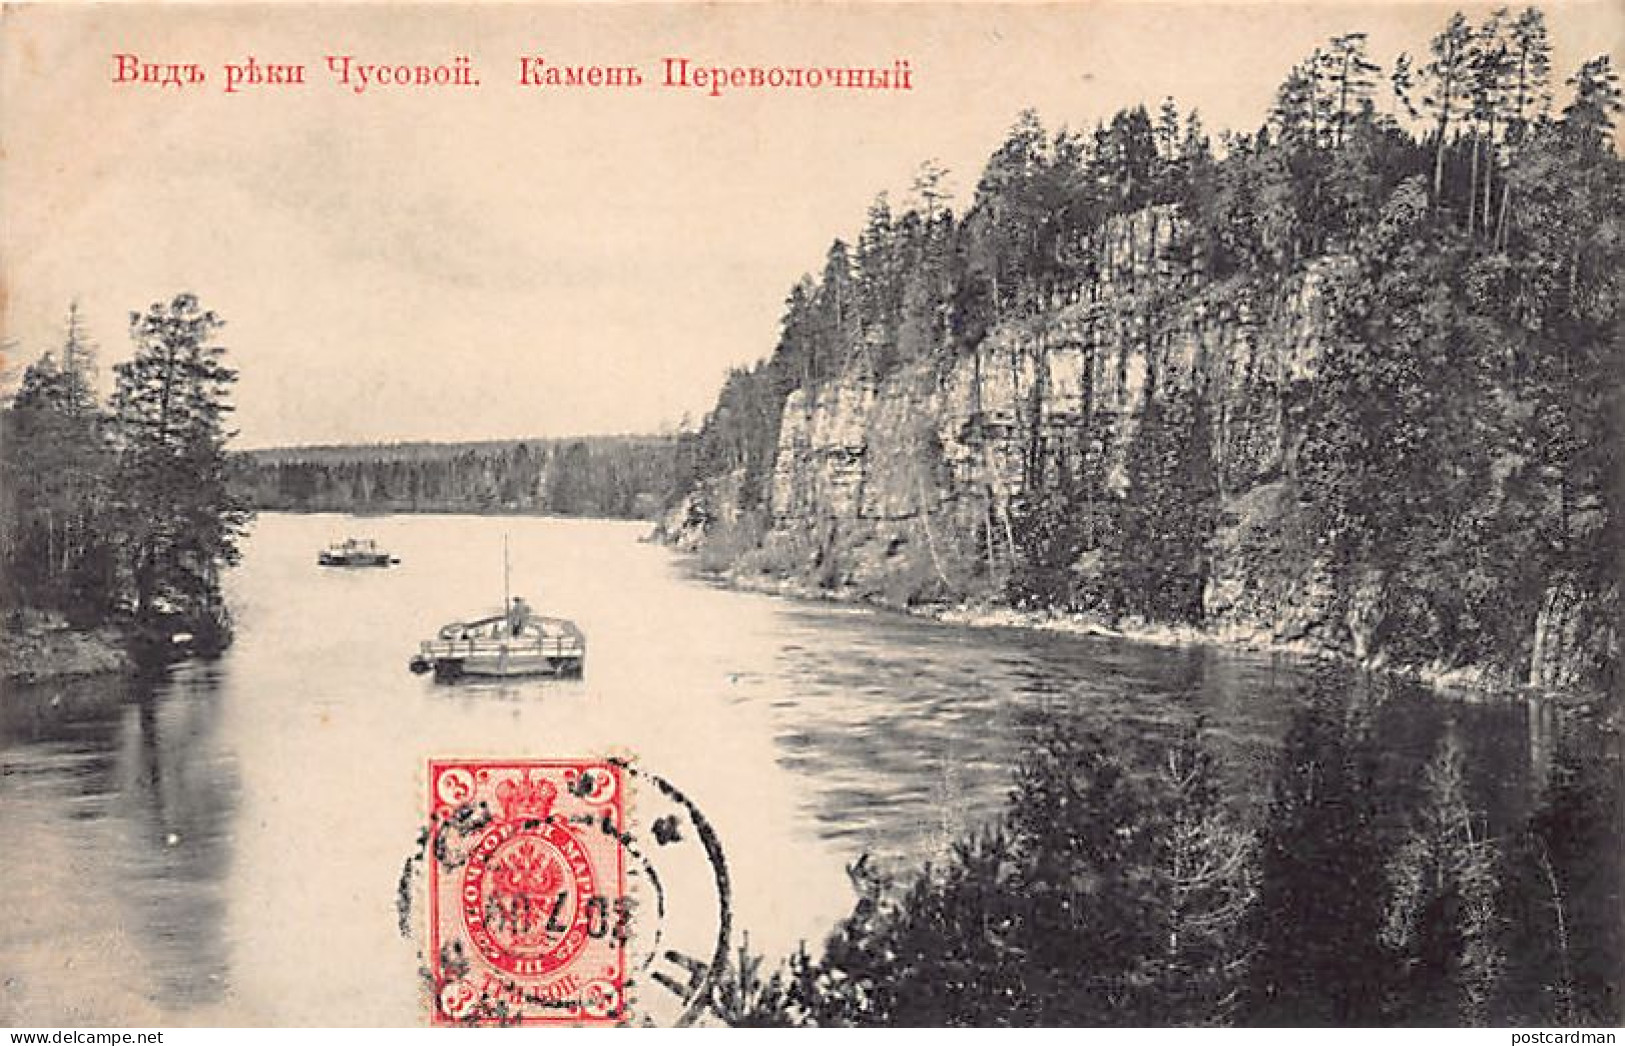 Russia - View Of The Chusovaya River - Perevolochny Stone - Publ. Unknown  - Russland